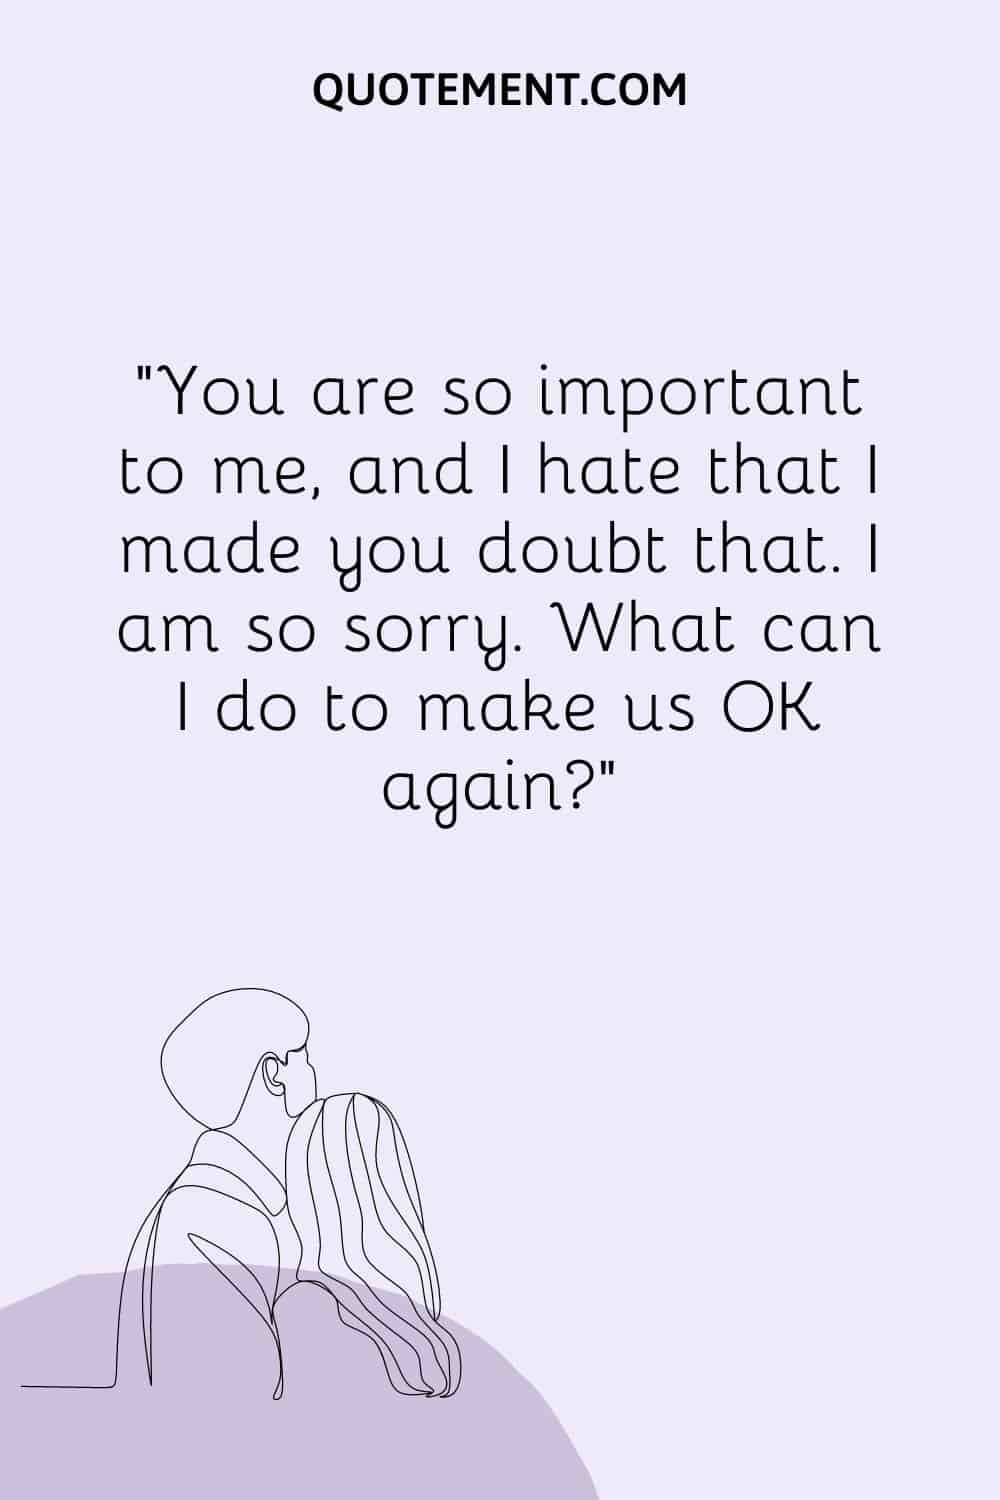 You are so important to me, and I hate that I made you doubt that